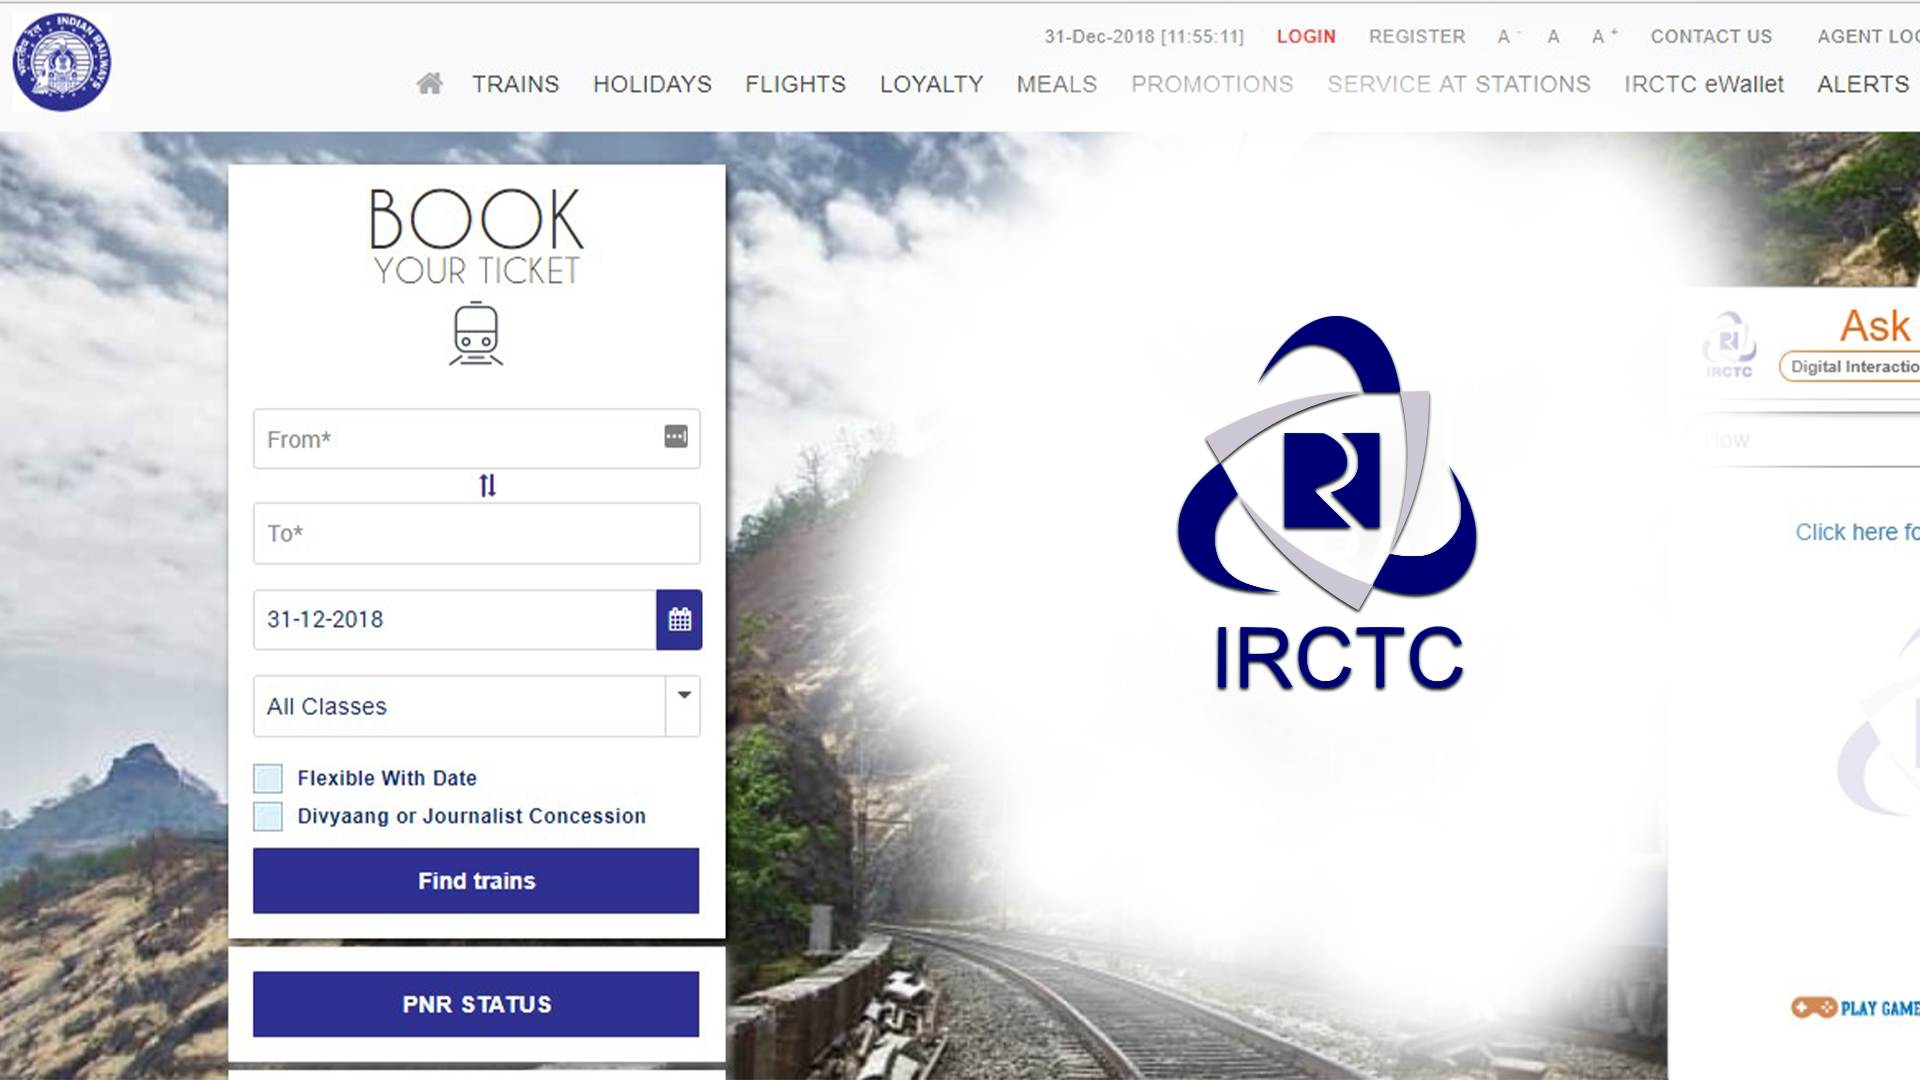 How To Create New Account on IRCTC